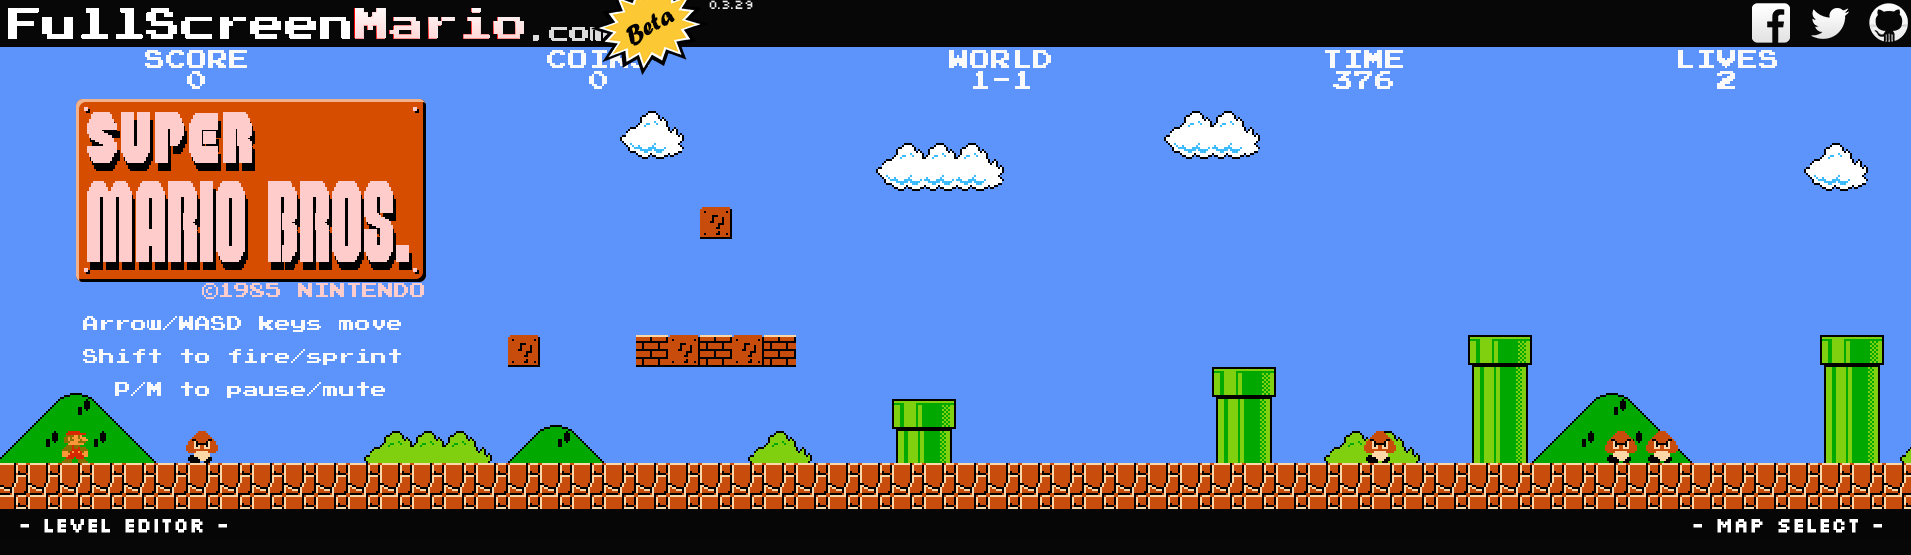 Super Mario Game Online The power of HTML5: playing Super Mario Bros on a browser! - The Daily Net